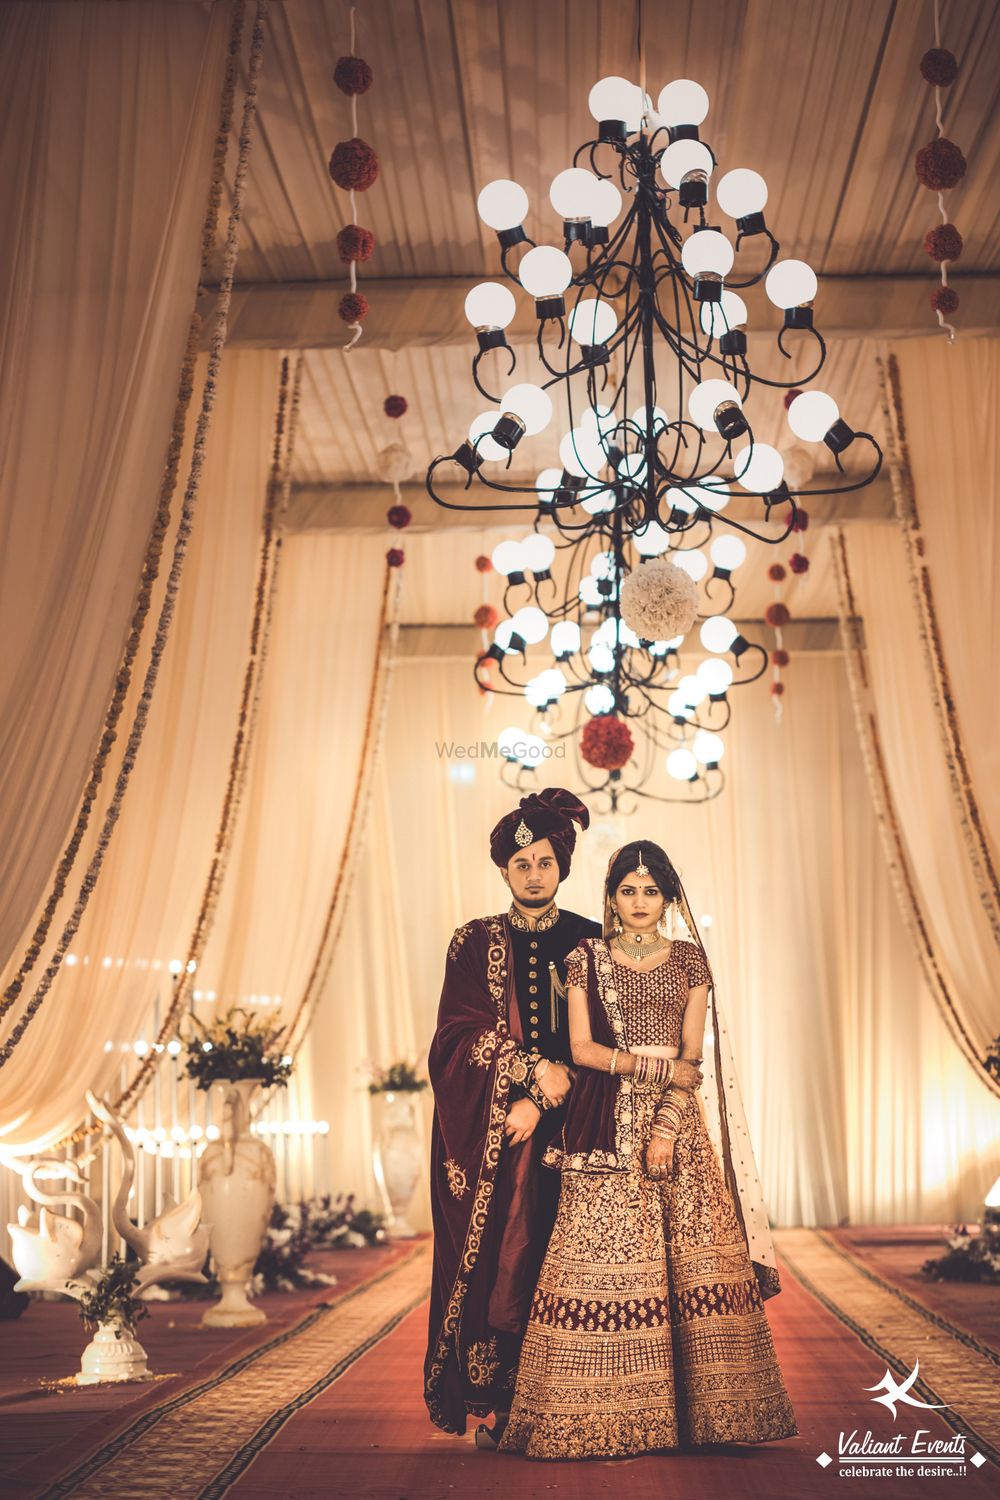 Photo From A Perfect Intimacy Of Memory Creators - Ravi & Qury - By Valiant Events